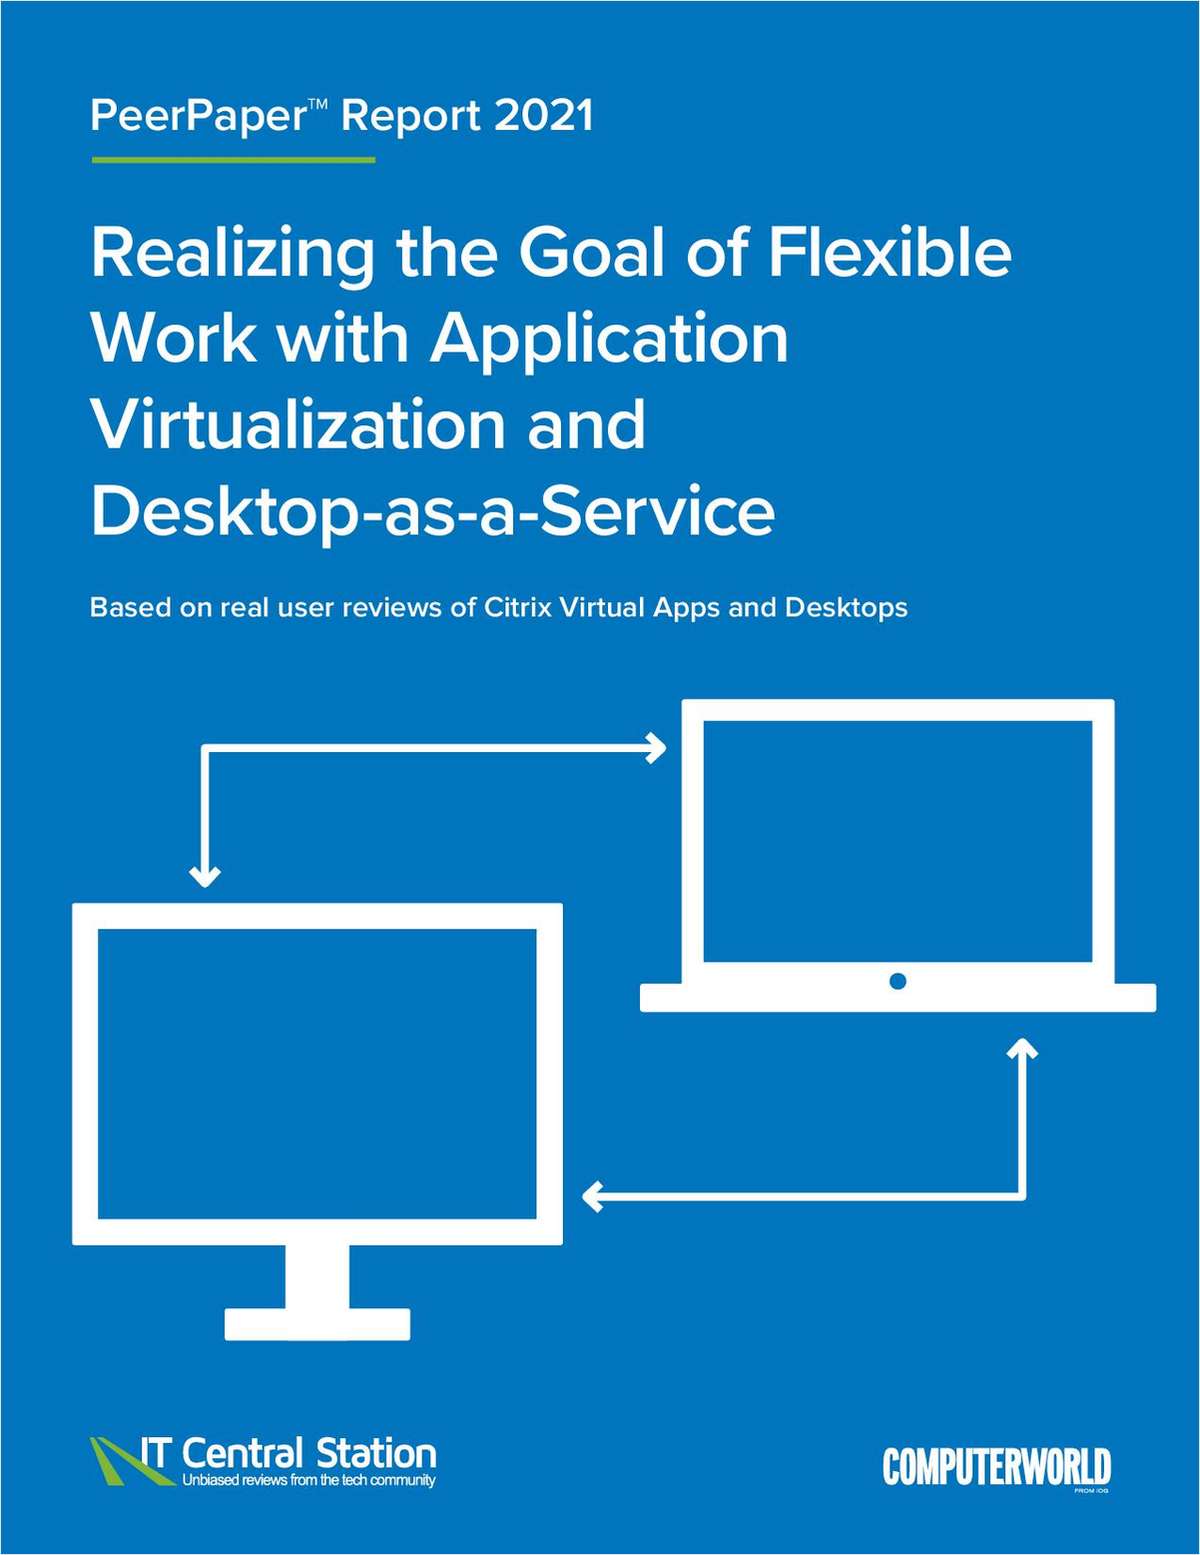 Realizing the Goal of Flexible Work with Application Virtualization and Desktop-as-a-Service